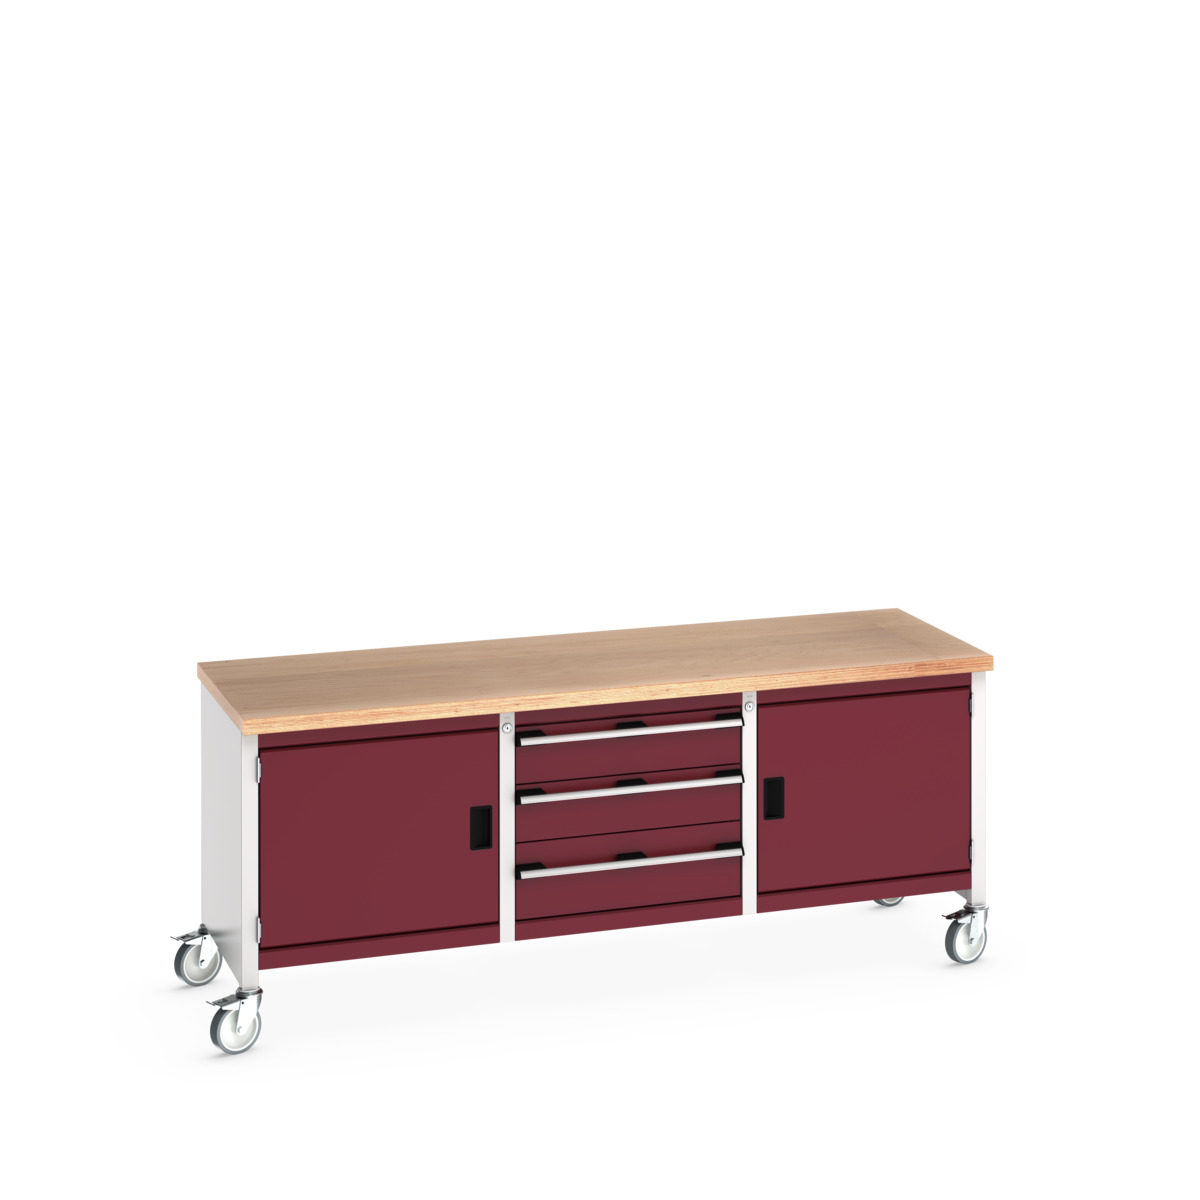 41002124.24V - cubio mobile storage bench (mpx)